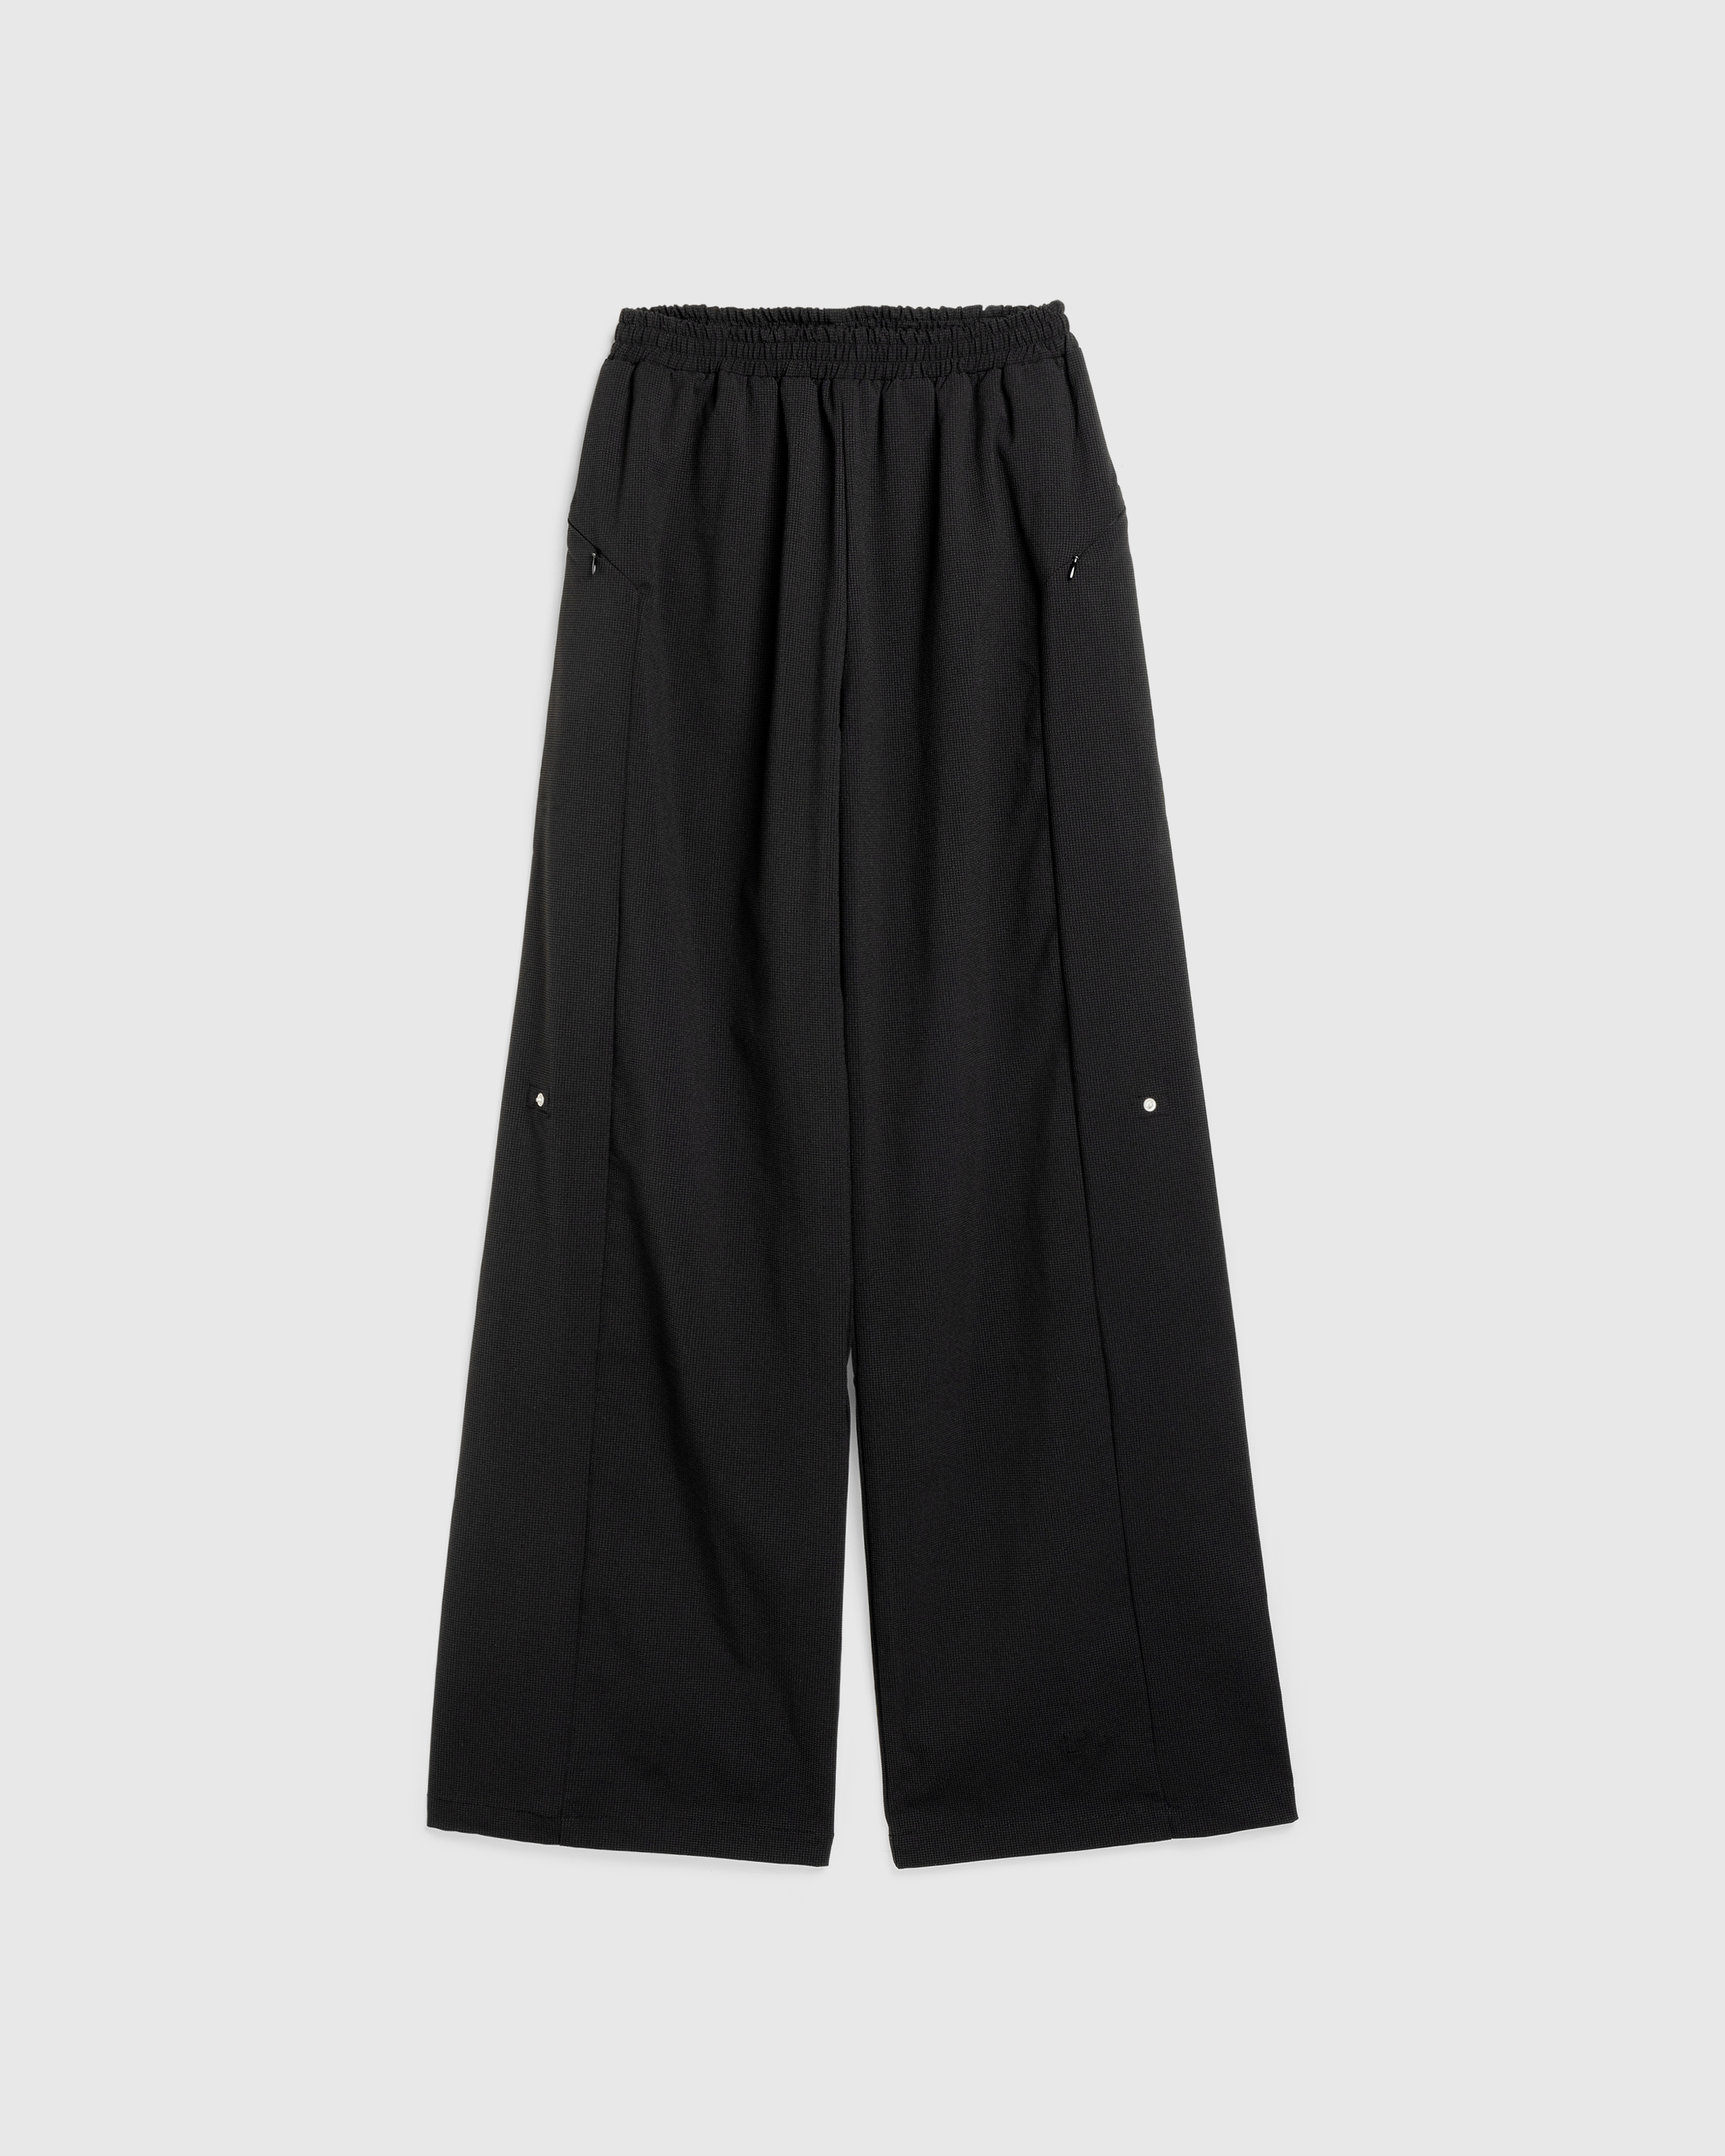 AFFXWRKS – Contract Pant Lead Black - Trousers - Black - Image 1